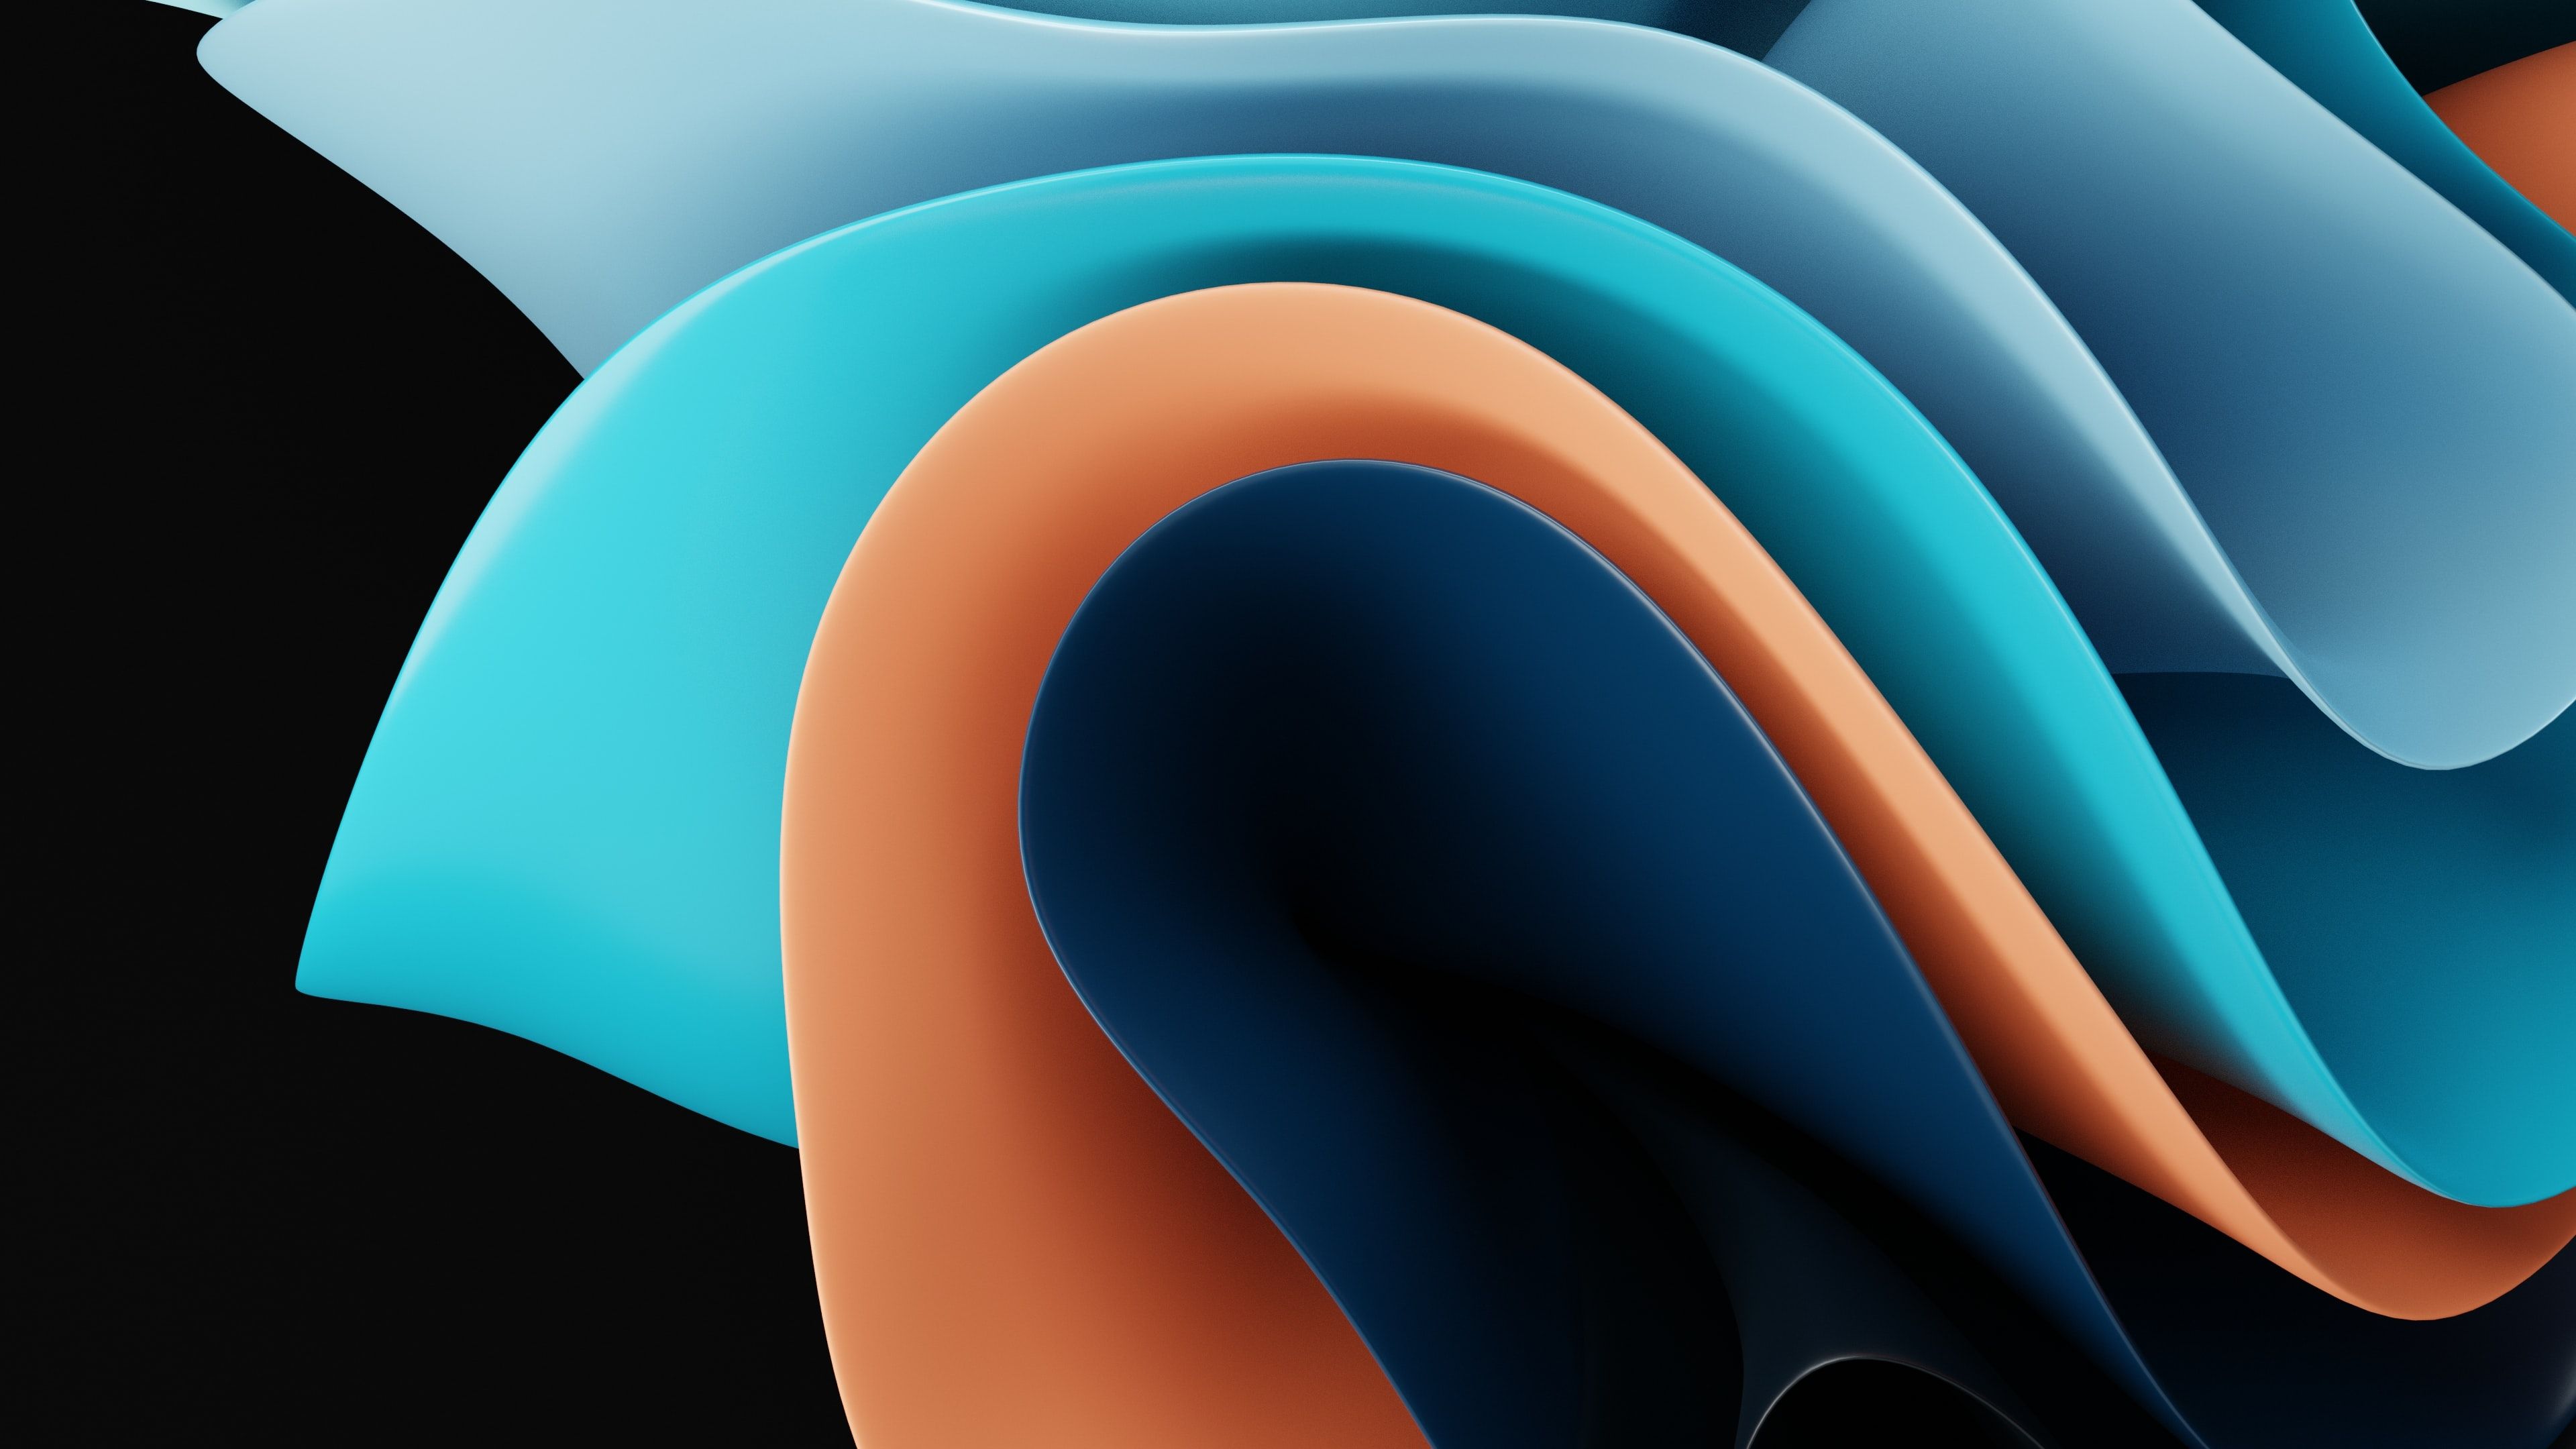 An abstract image of flowing blue and orange shapes - Windows 11